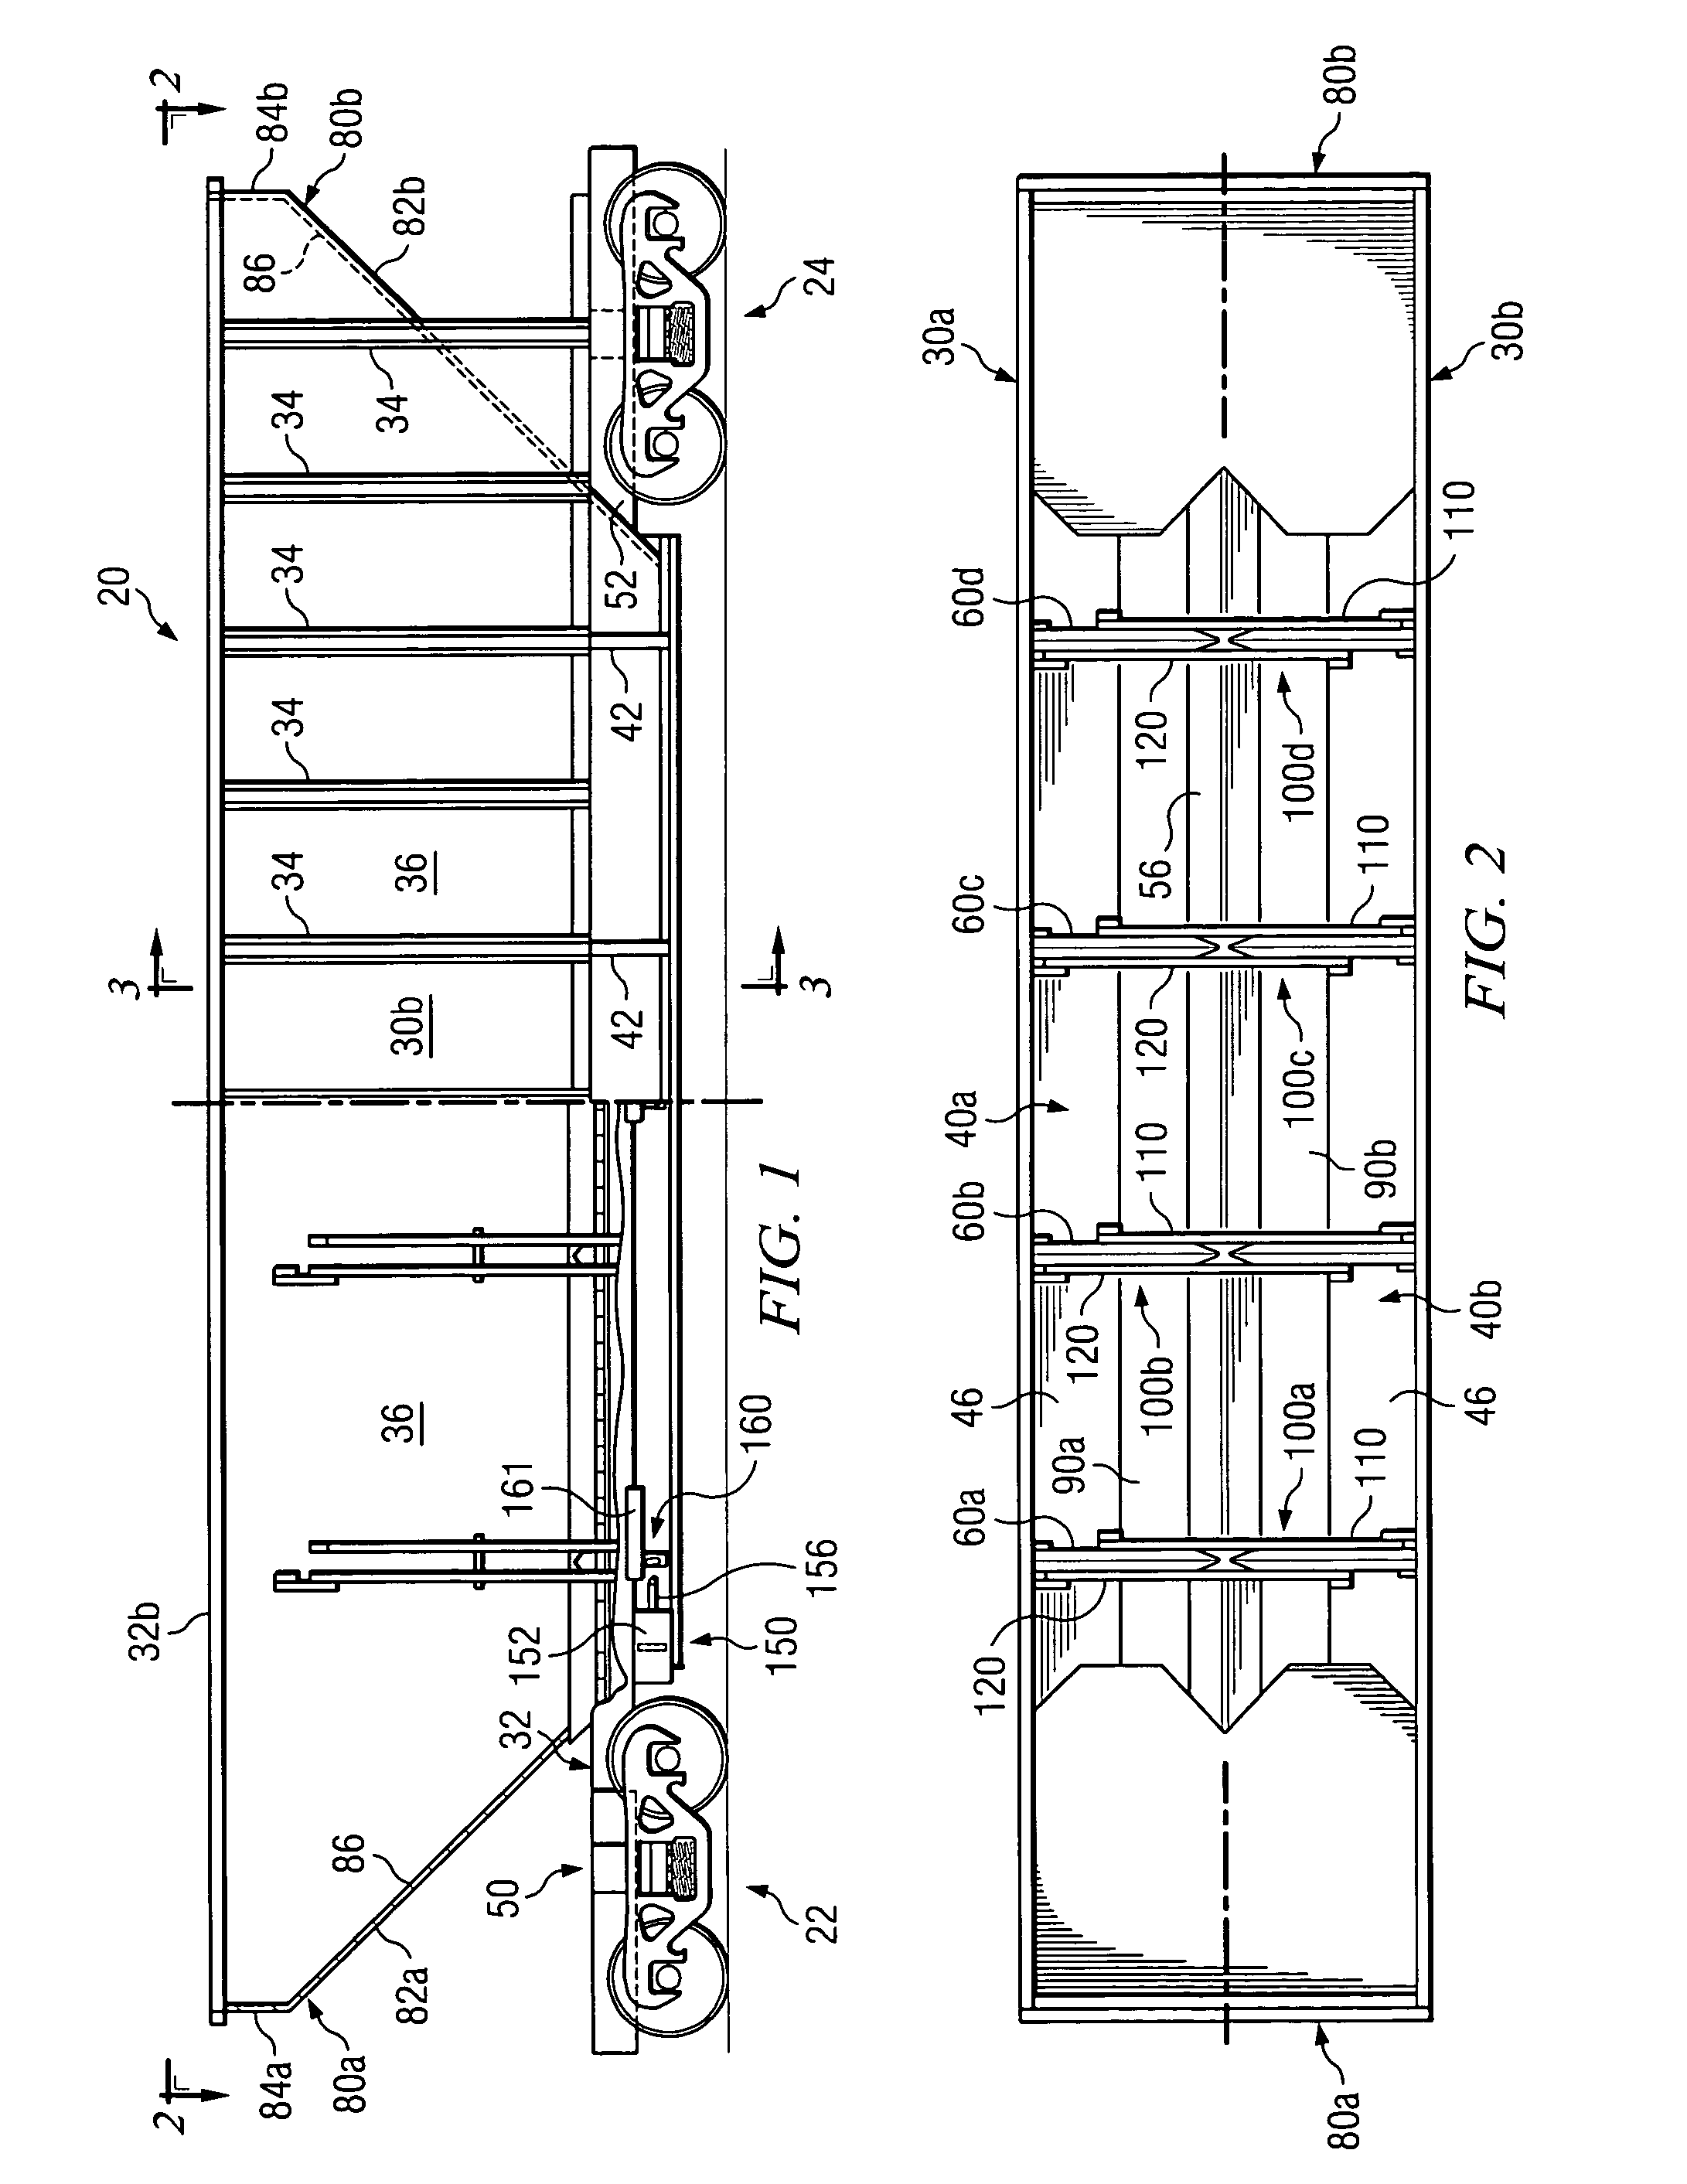 Railcar with discharge control system